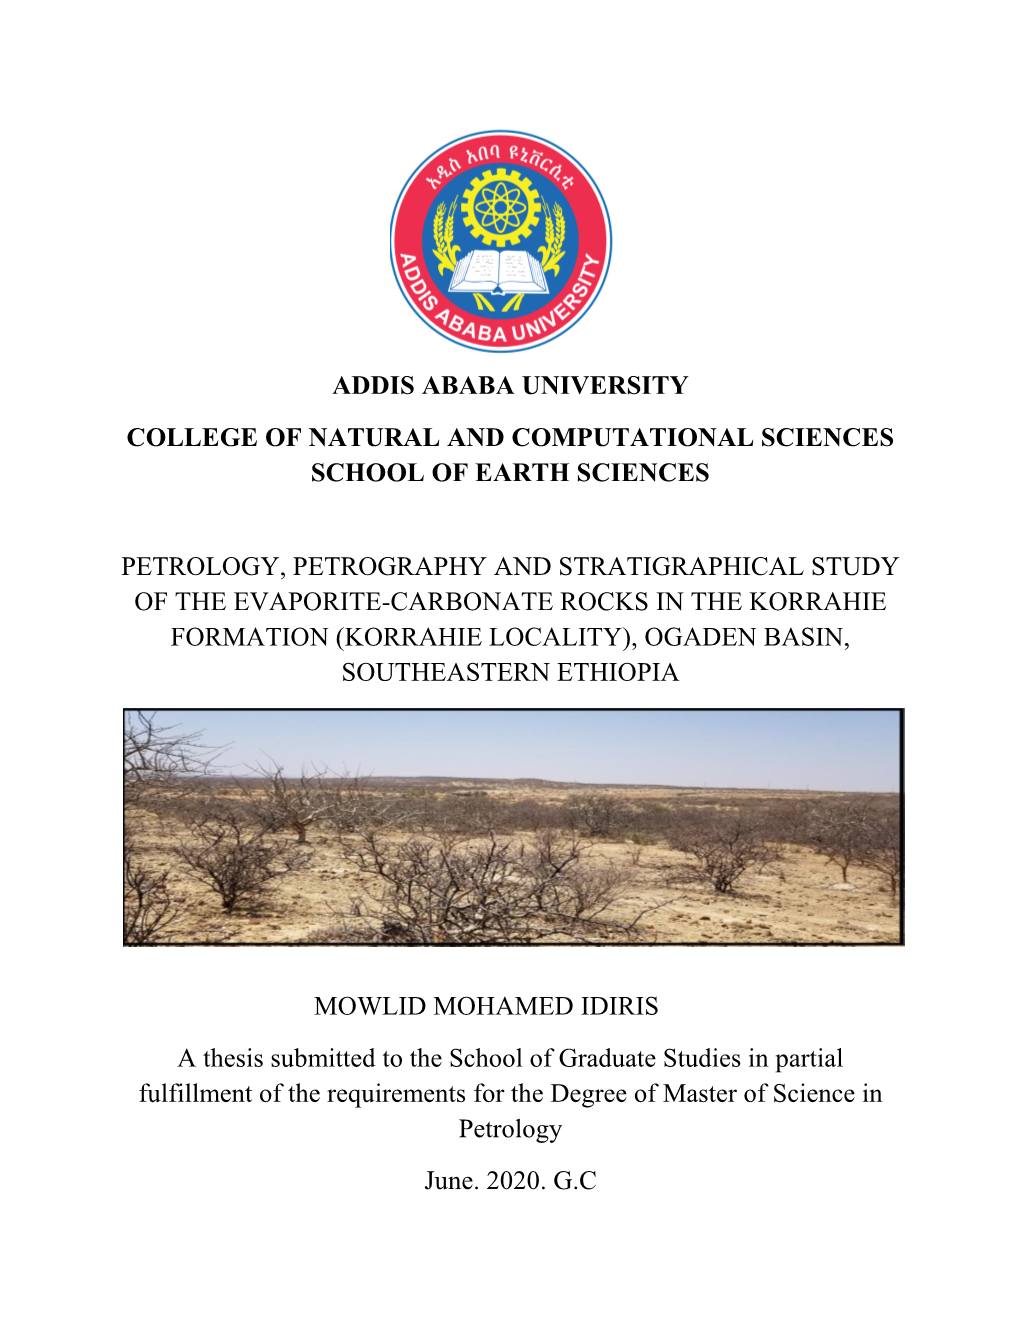 Petrology, Petrography and Stratigraphical Study of the Evaporite-Carbonate Rocks in the Korrahie Formation (Korrahie Locality), Ogaden Basin, Southeastern Ethiopia